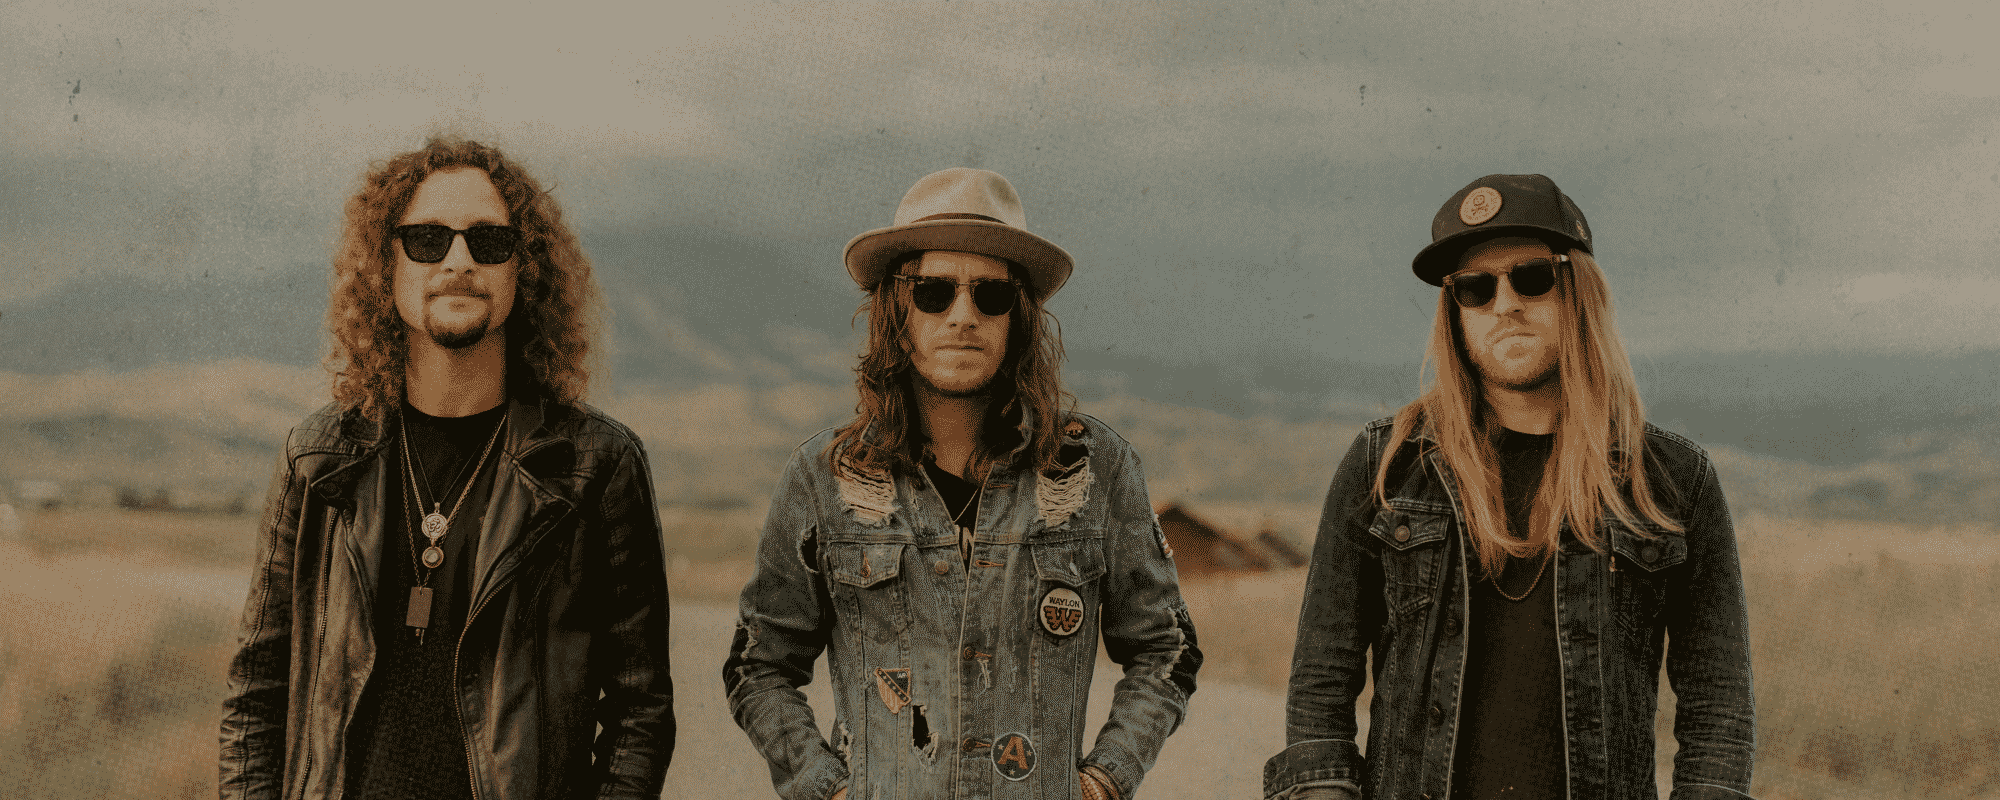 Nashville’s Native Sons, The Cadillac Three Grab Well-Deserved ACM Nomination